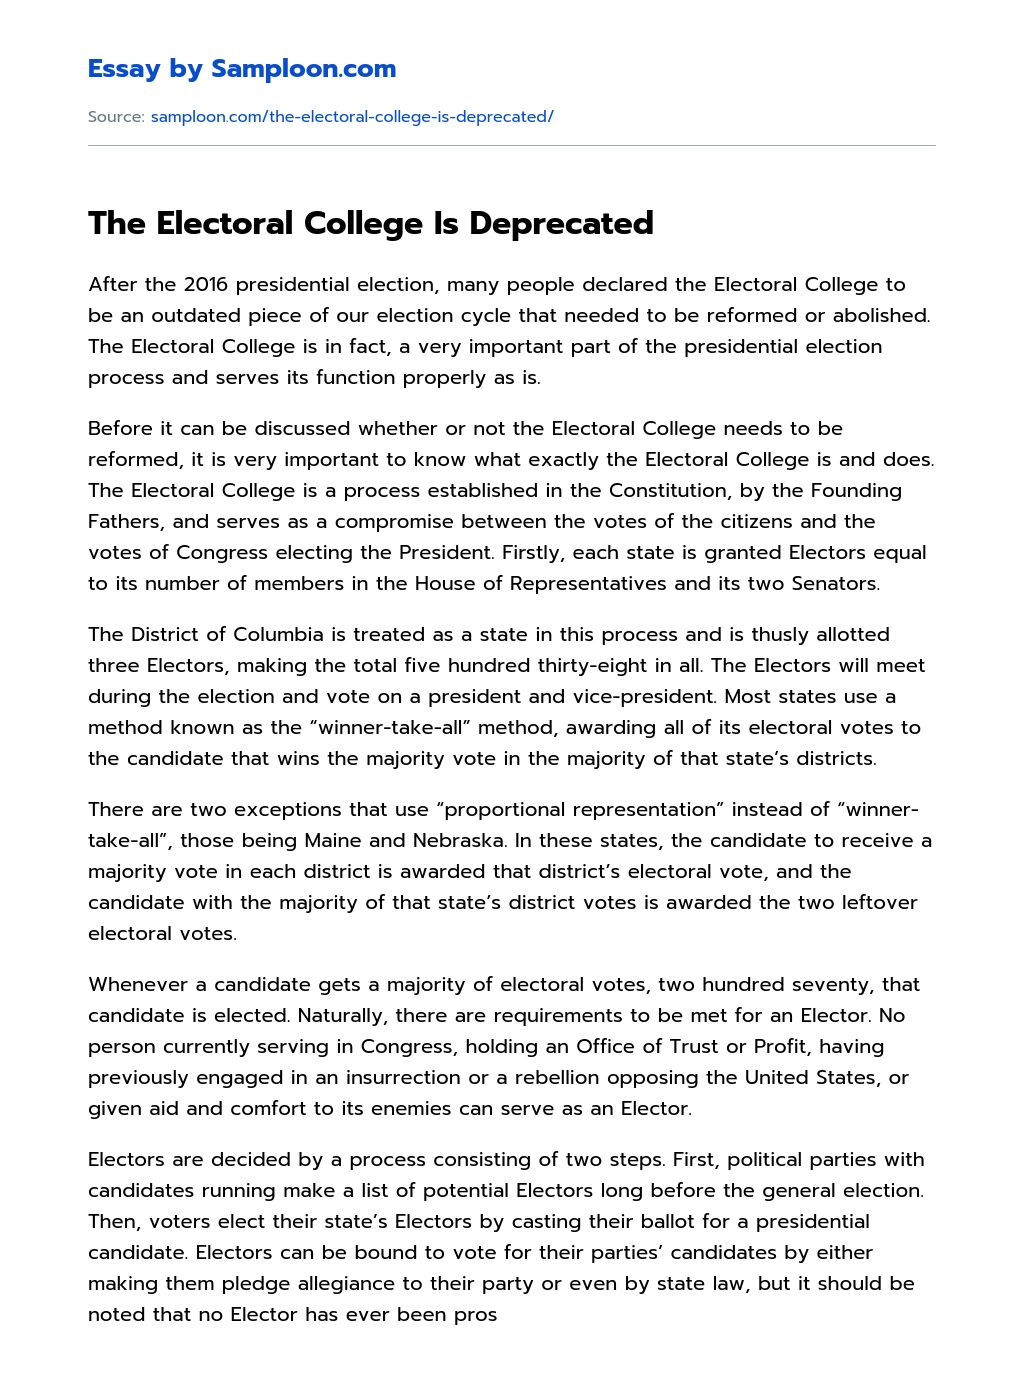 The Electoral College Is Deprecated essay